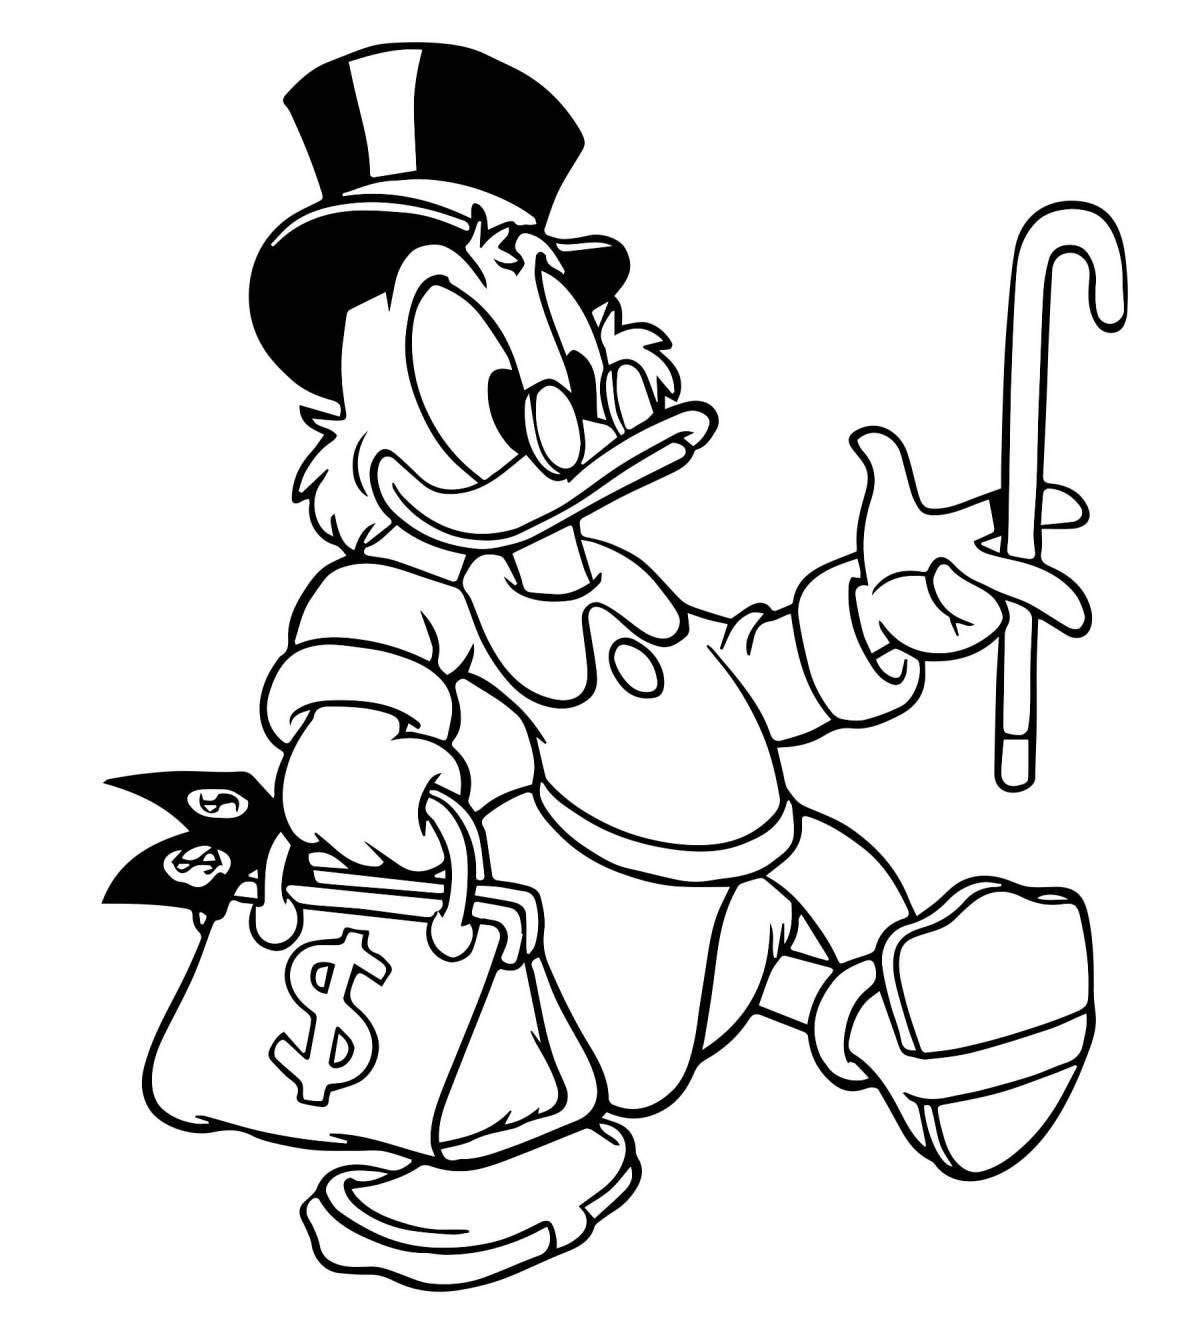 Glorious scrooge coloring page